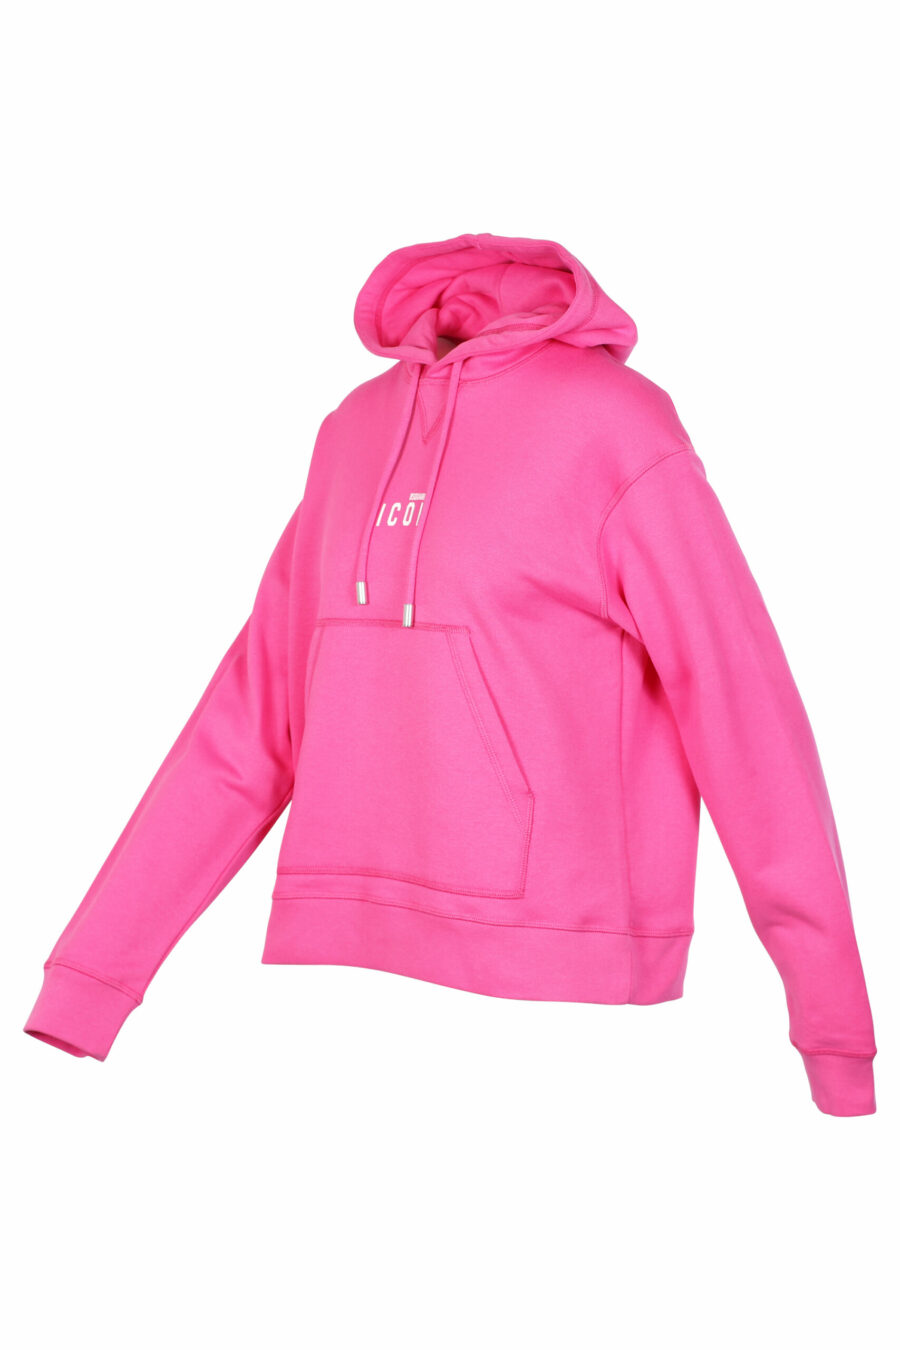 Fuchsia hooded sweatshirt with central "Icon" minilogue - 8054148005221 2 scaled